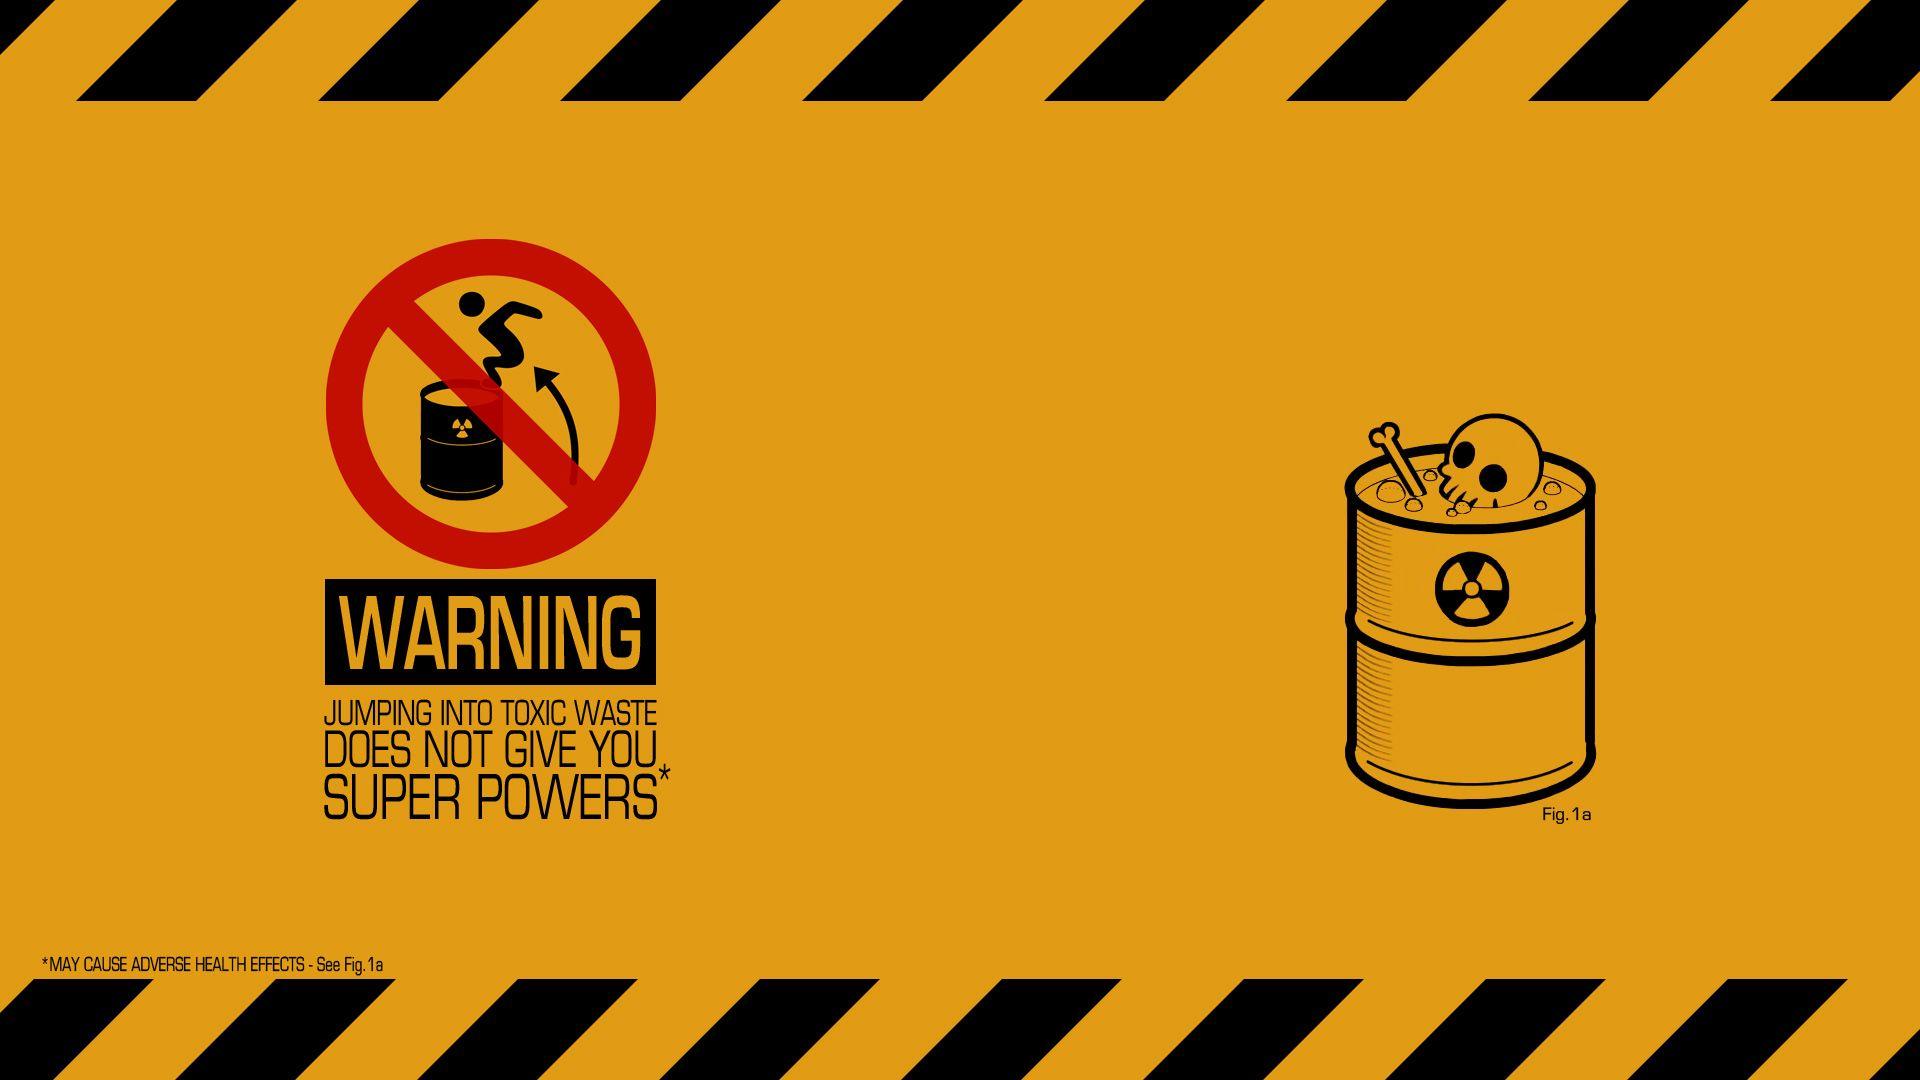 Warning, toxic waste does not give super powers